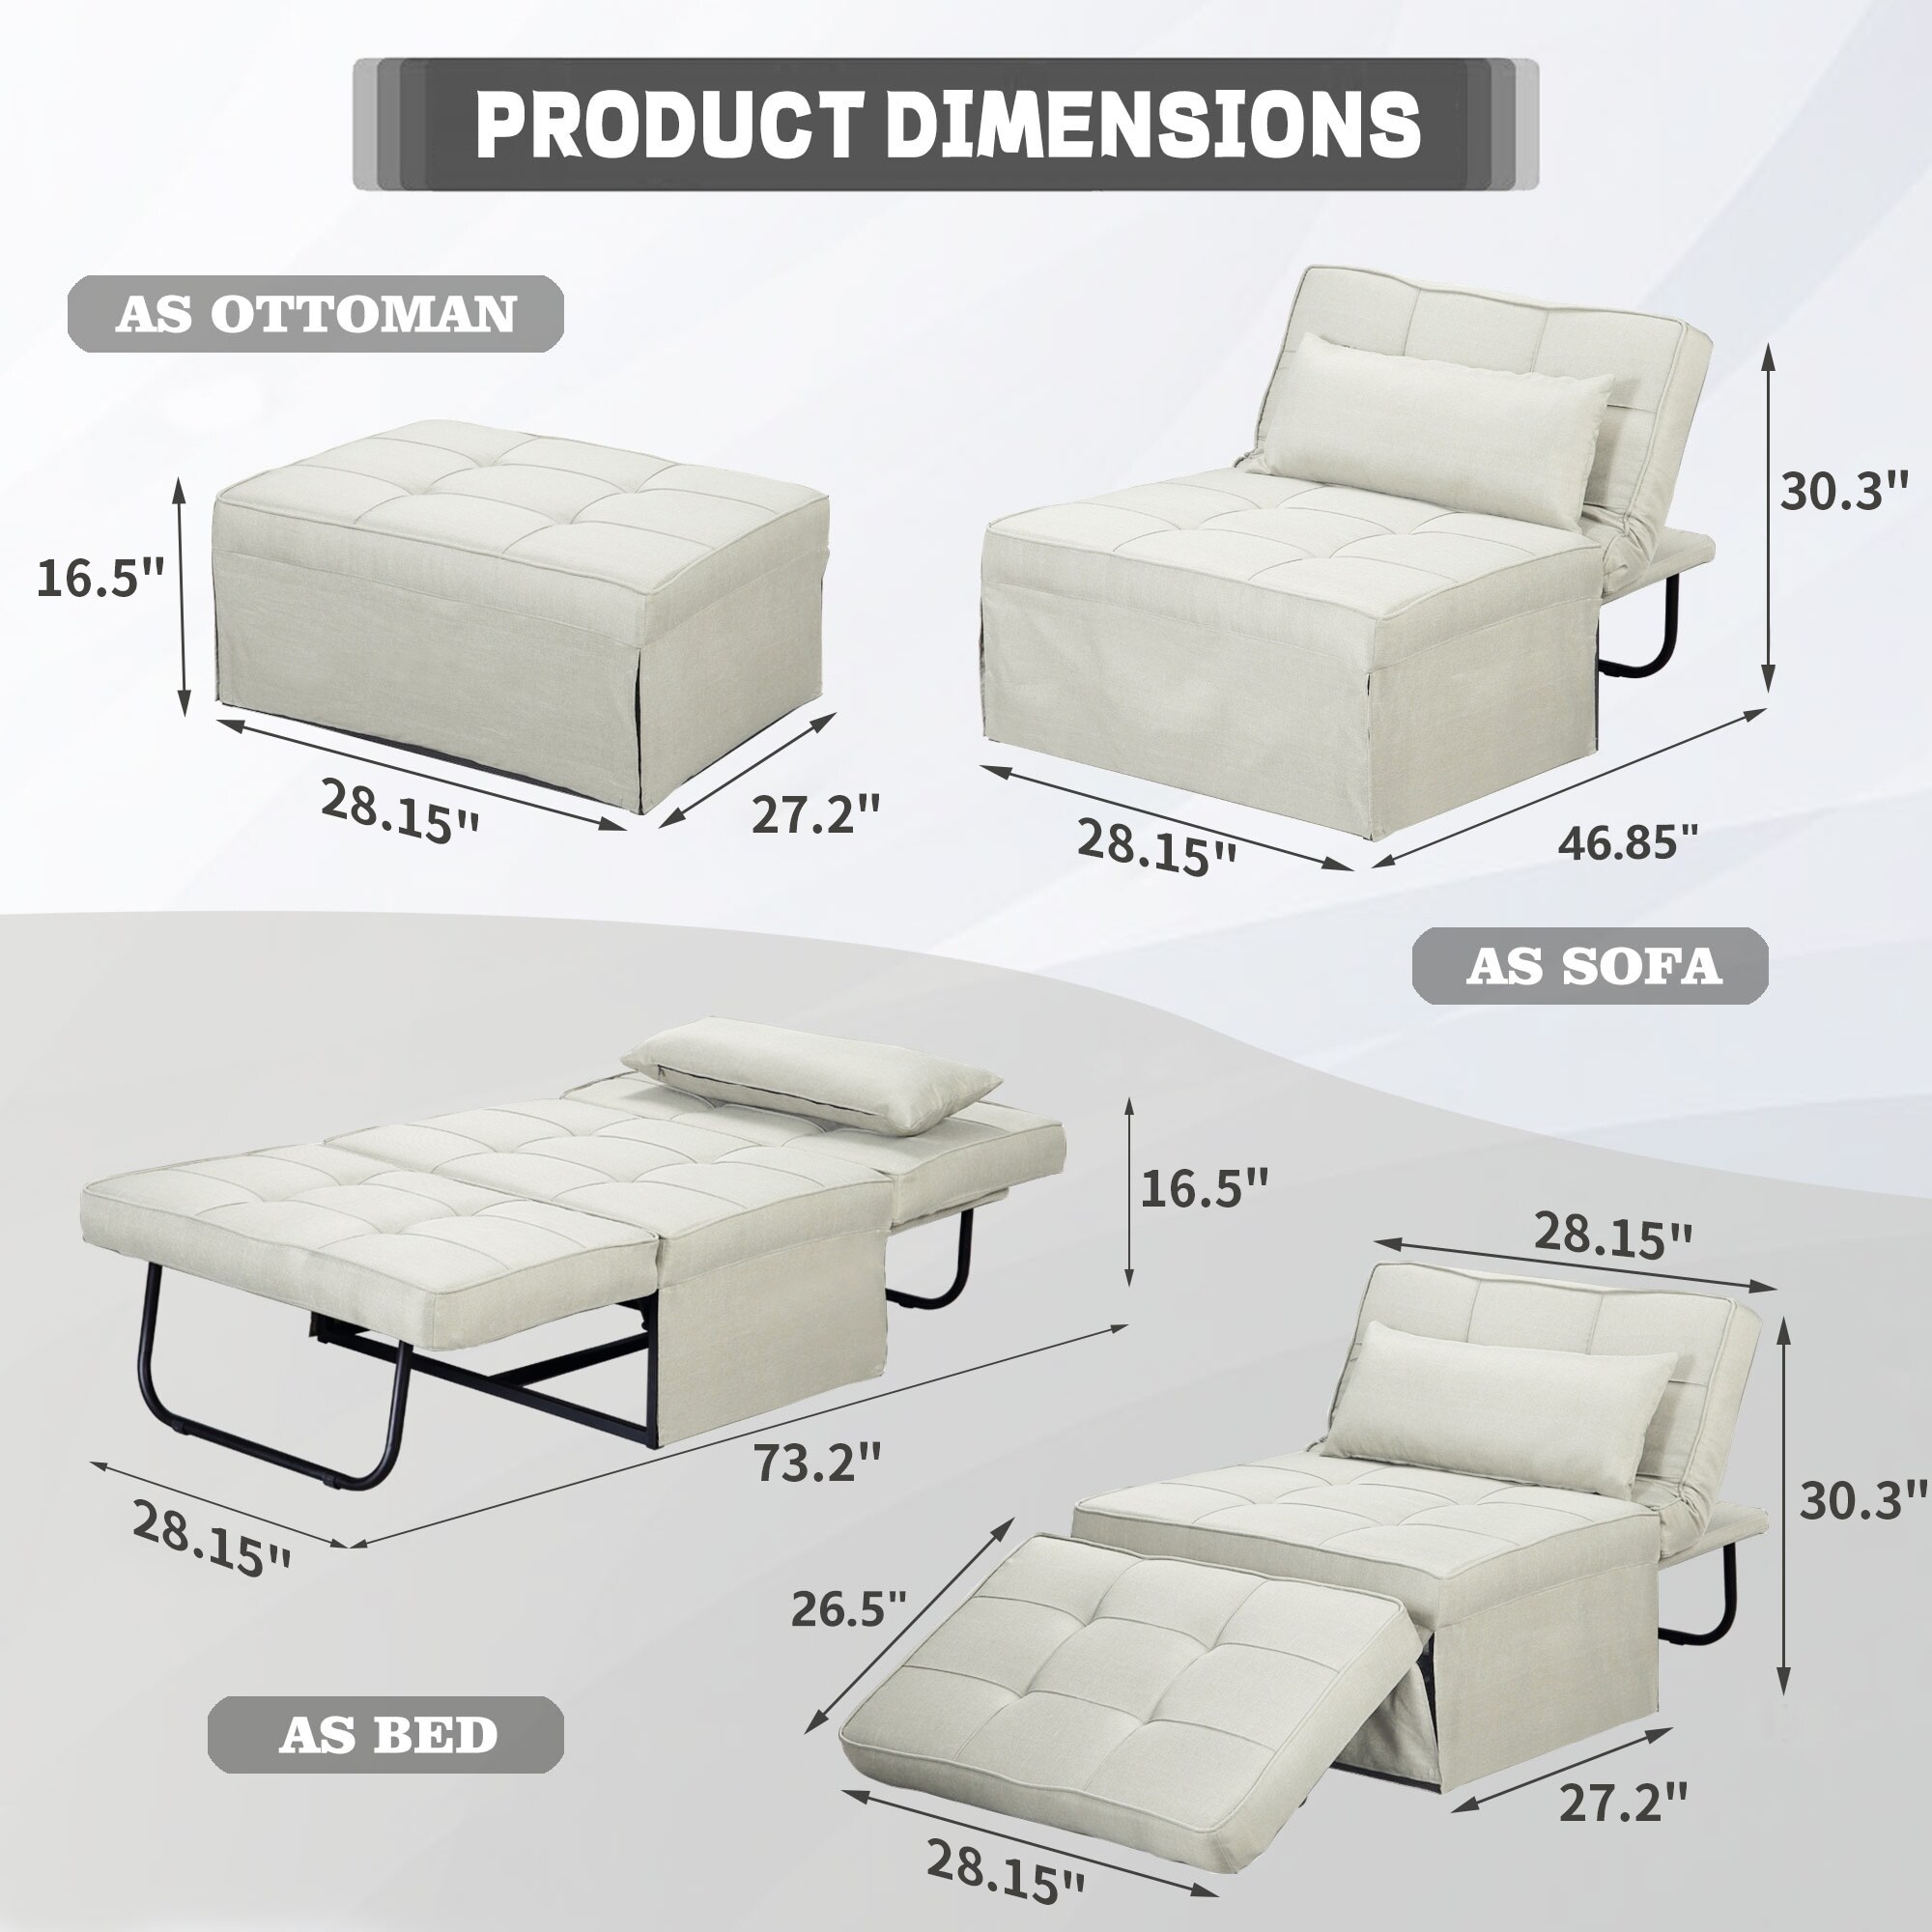 https://ak1.ostkcdn.com/images/products/is/images/direct/c19a6eb85550bf0b71dd9ee4a6db2d41bd4342cc/Zenova-4-1-Adjustable-Sofa-Bed-Folding-Convertible-Chair-Sofa-Sleeper-Ottoman-Sofa-Seat.jpg